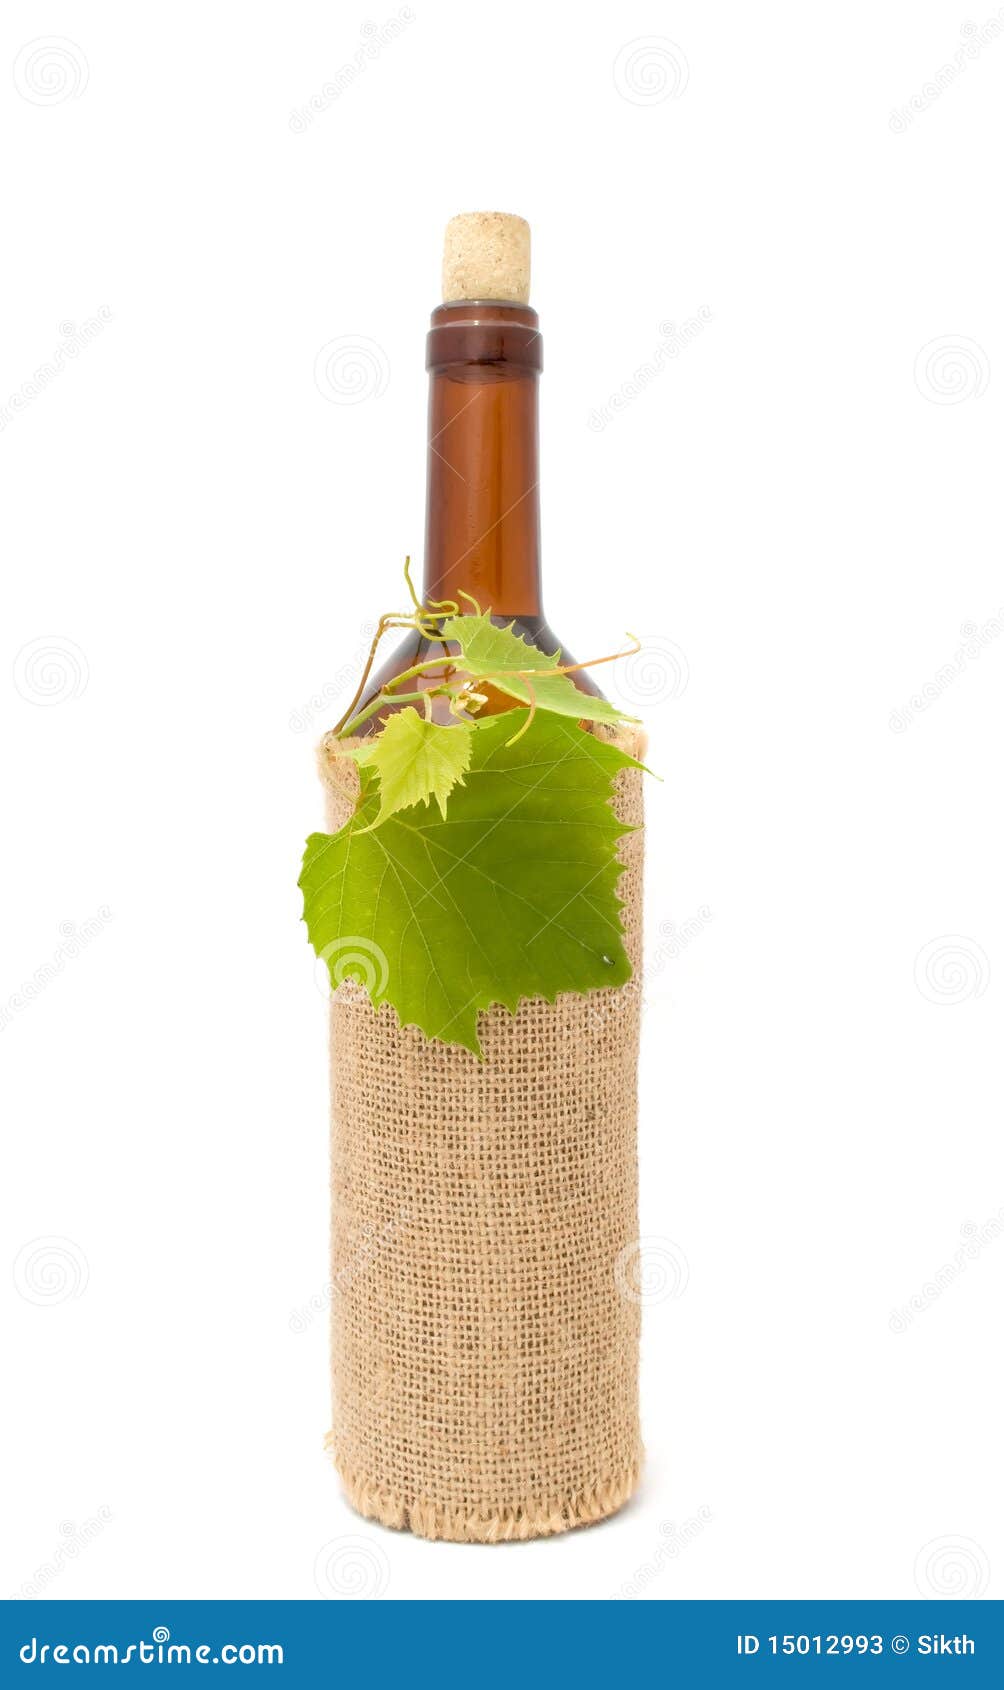 bottle of white wine in sackcloth